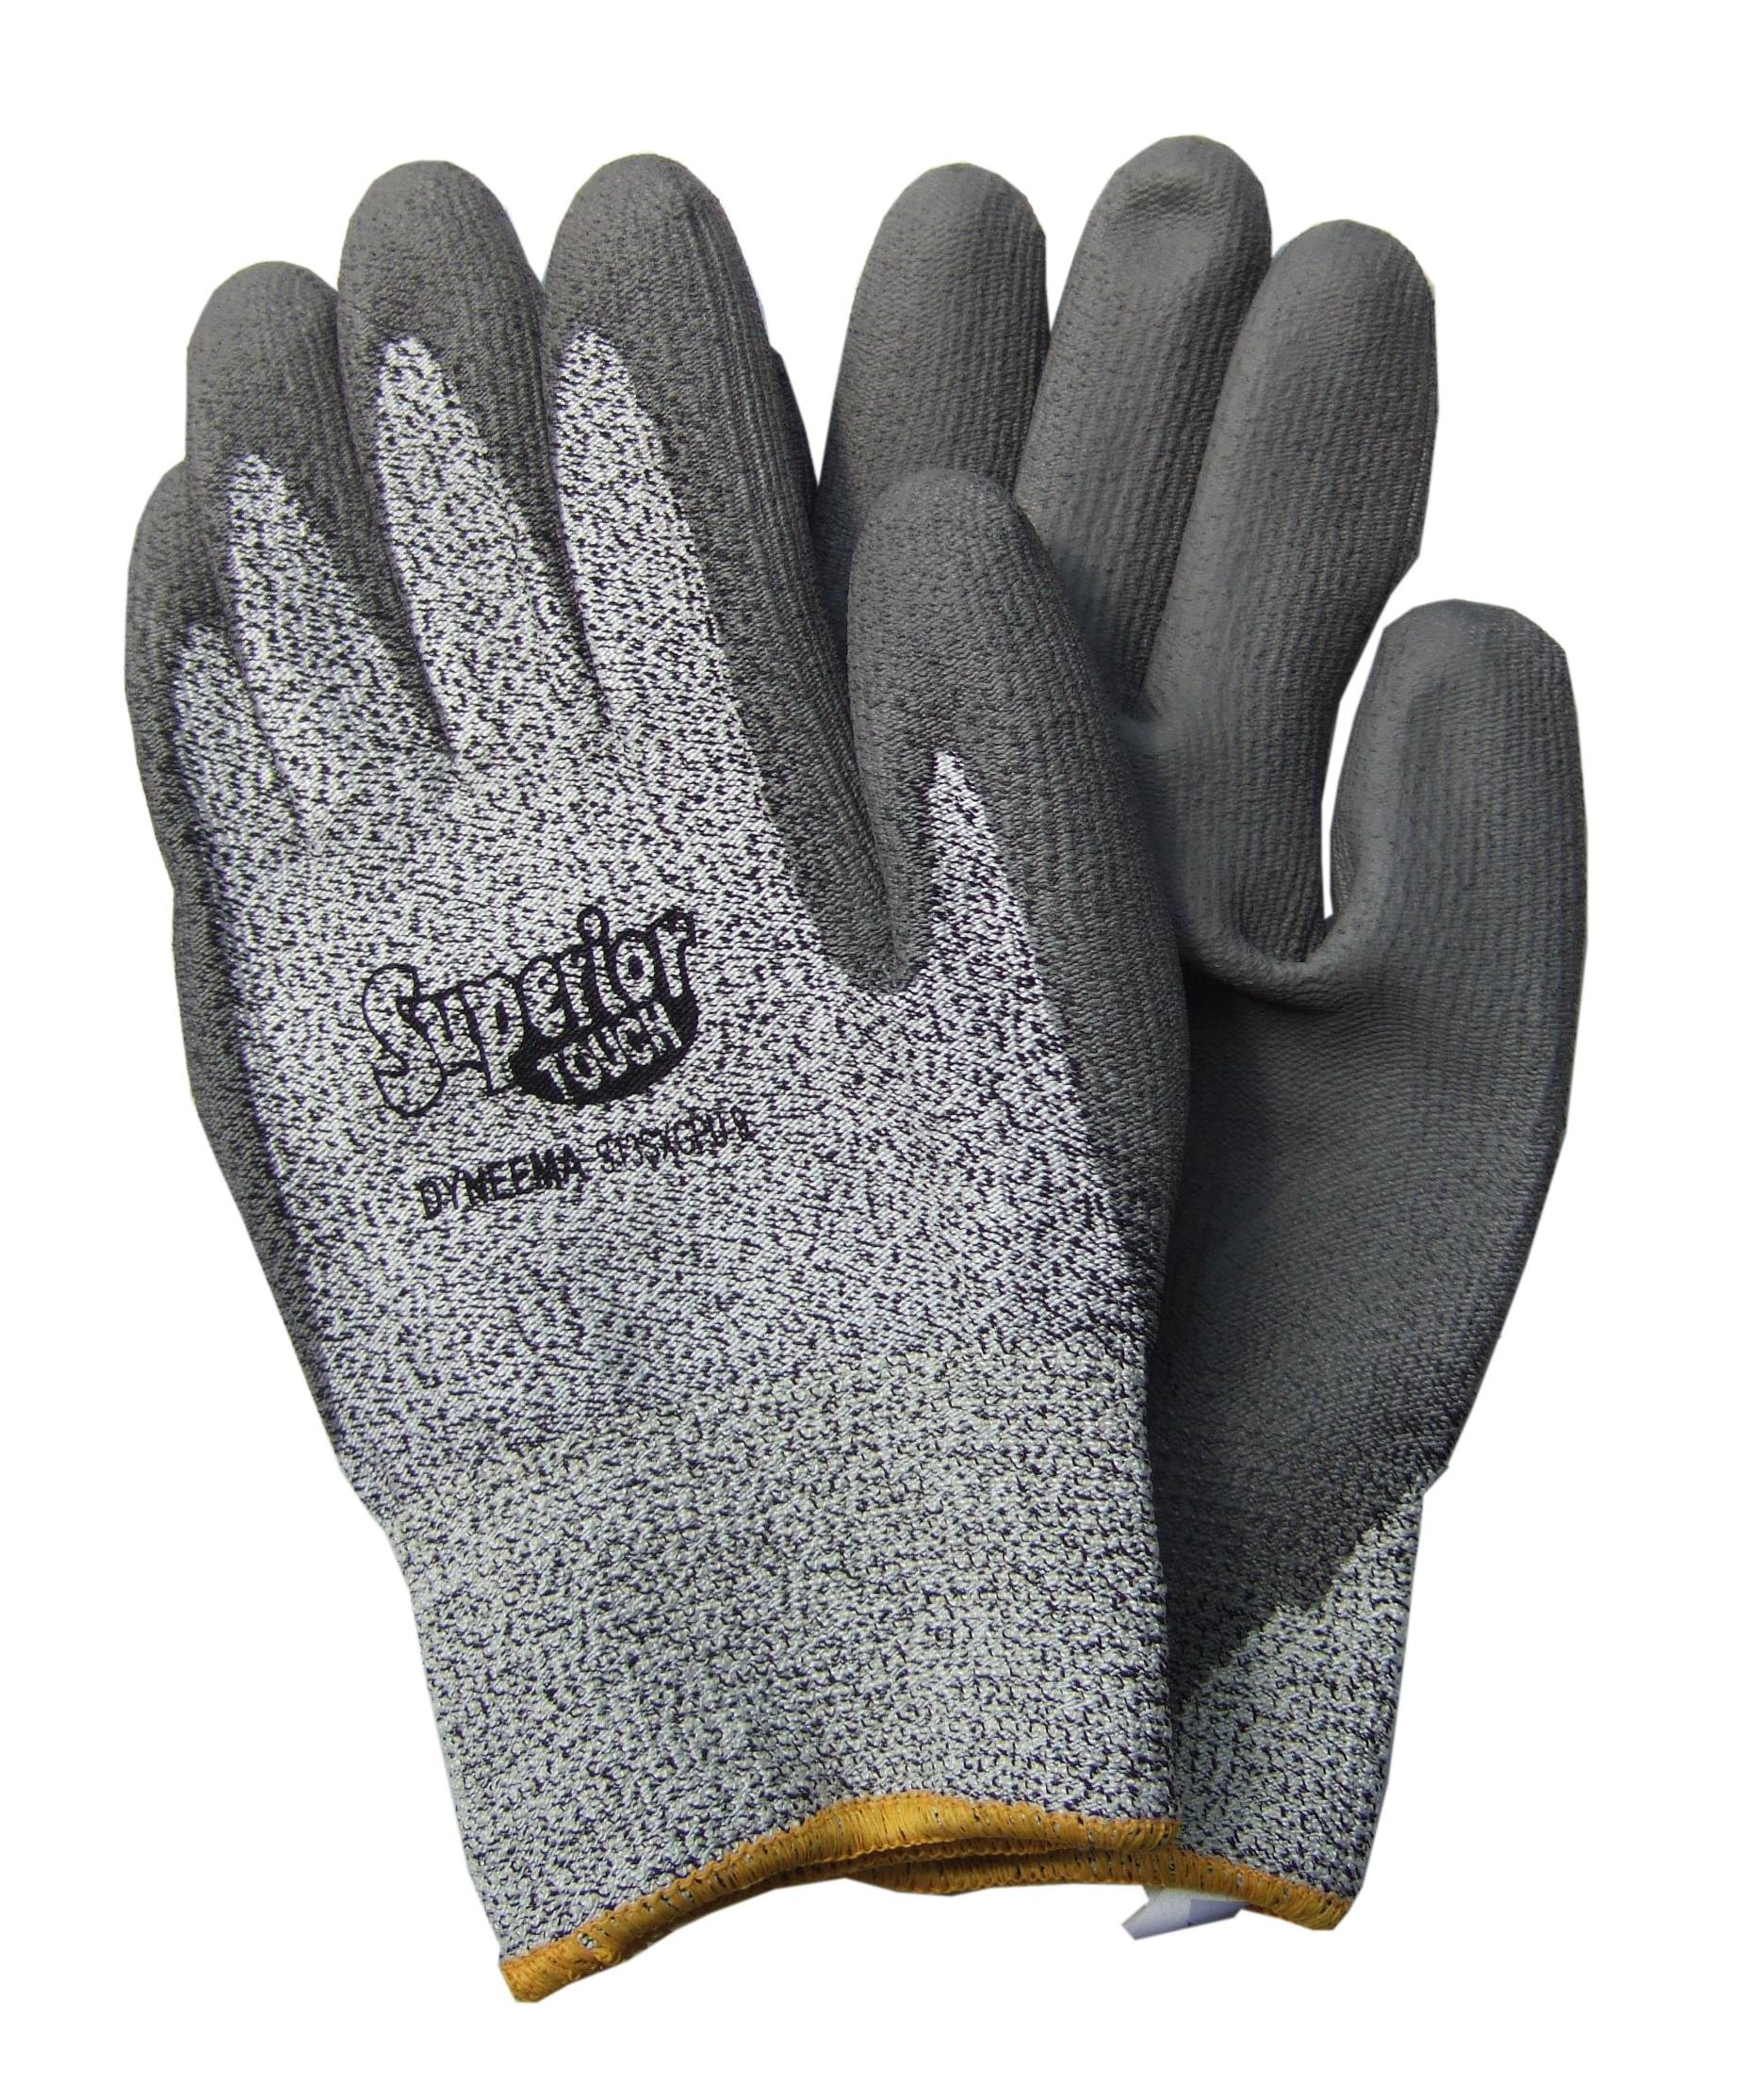 Superior Touch® 13-gauge gray Dyneema knit gloves with PU coating.